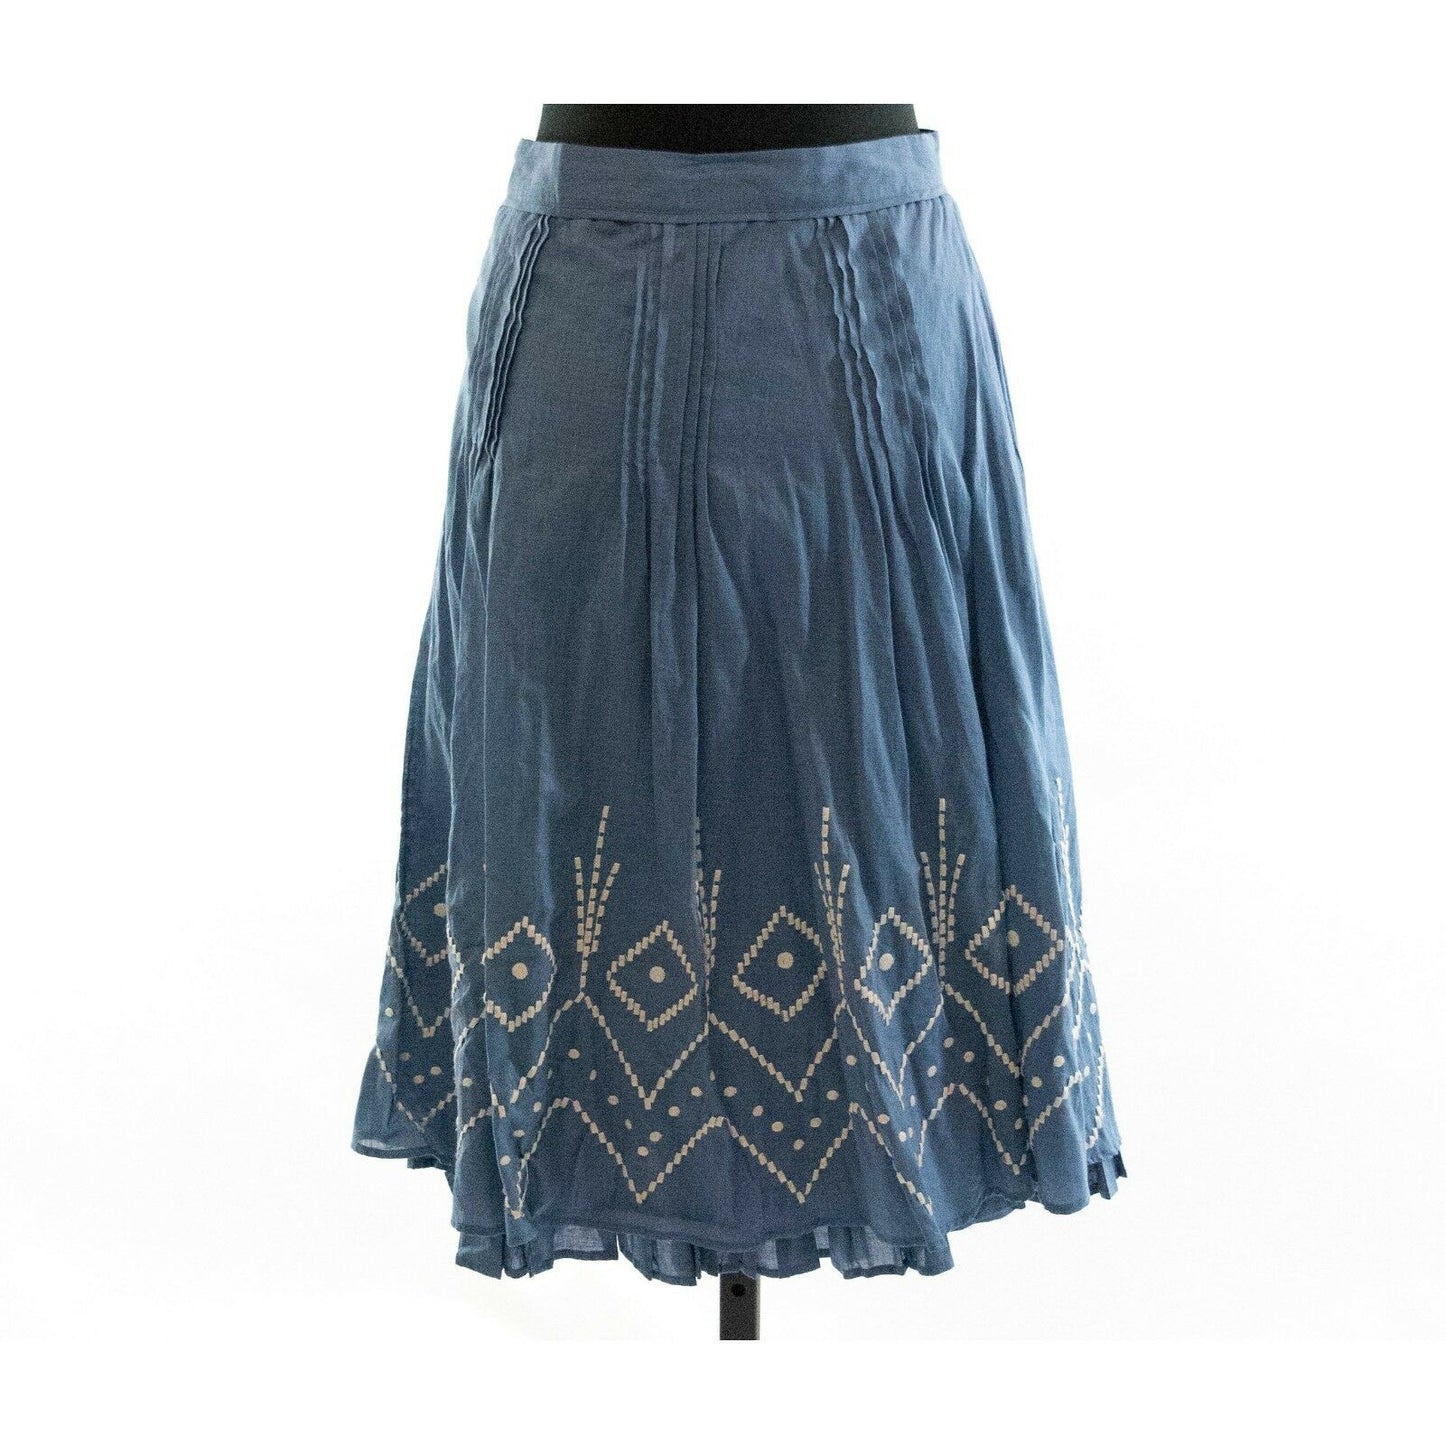 H&M Blue White Embroidered Pintuck A Line Lined Cotton Skirt 10 EUC